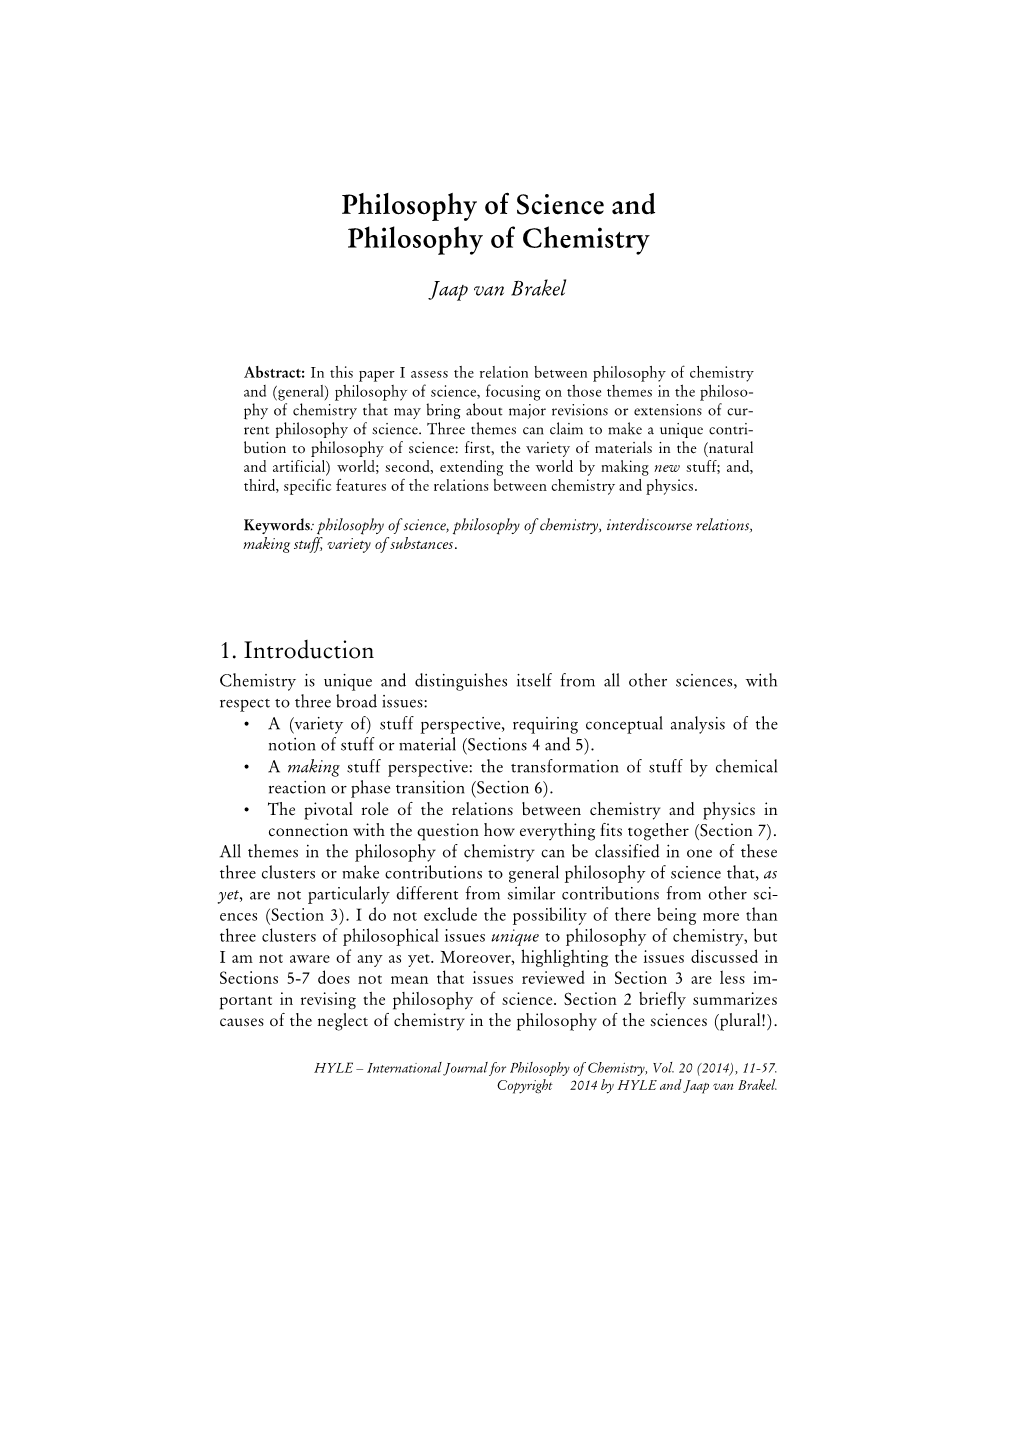 Philosophy of Science and Philosophy of Chemistry